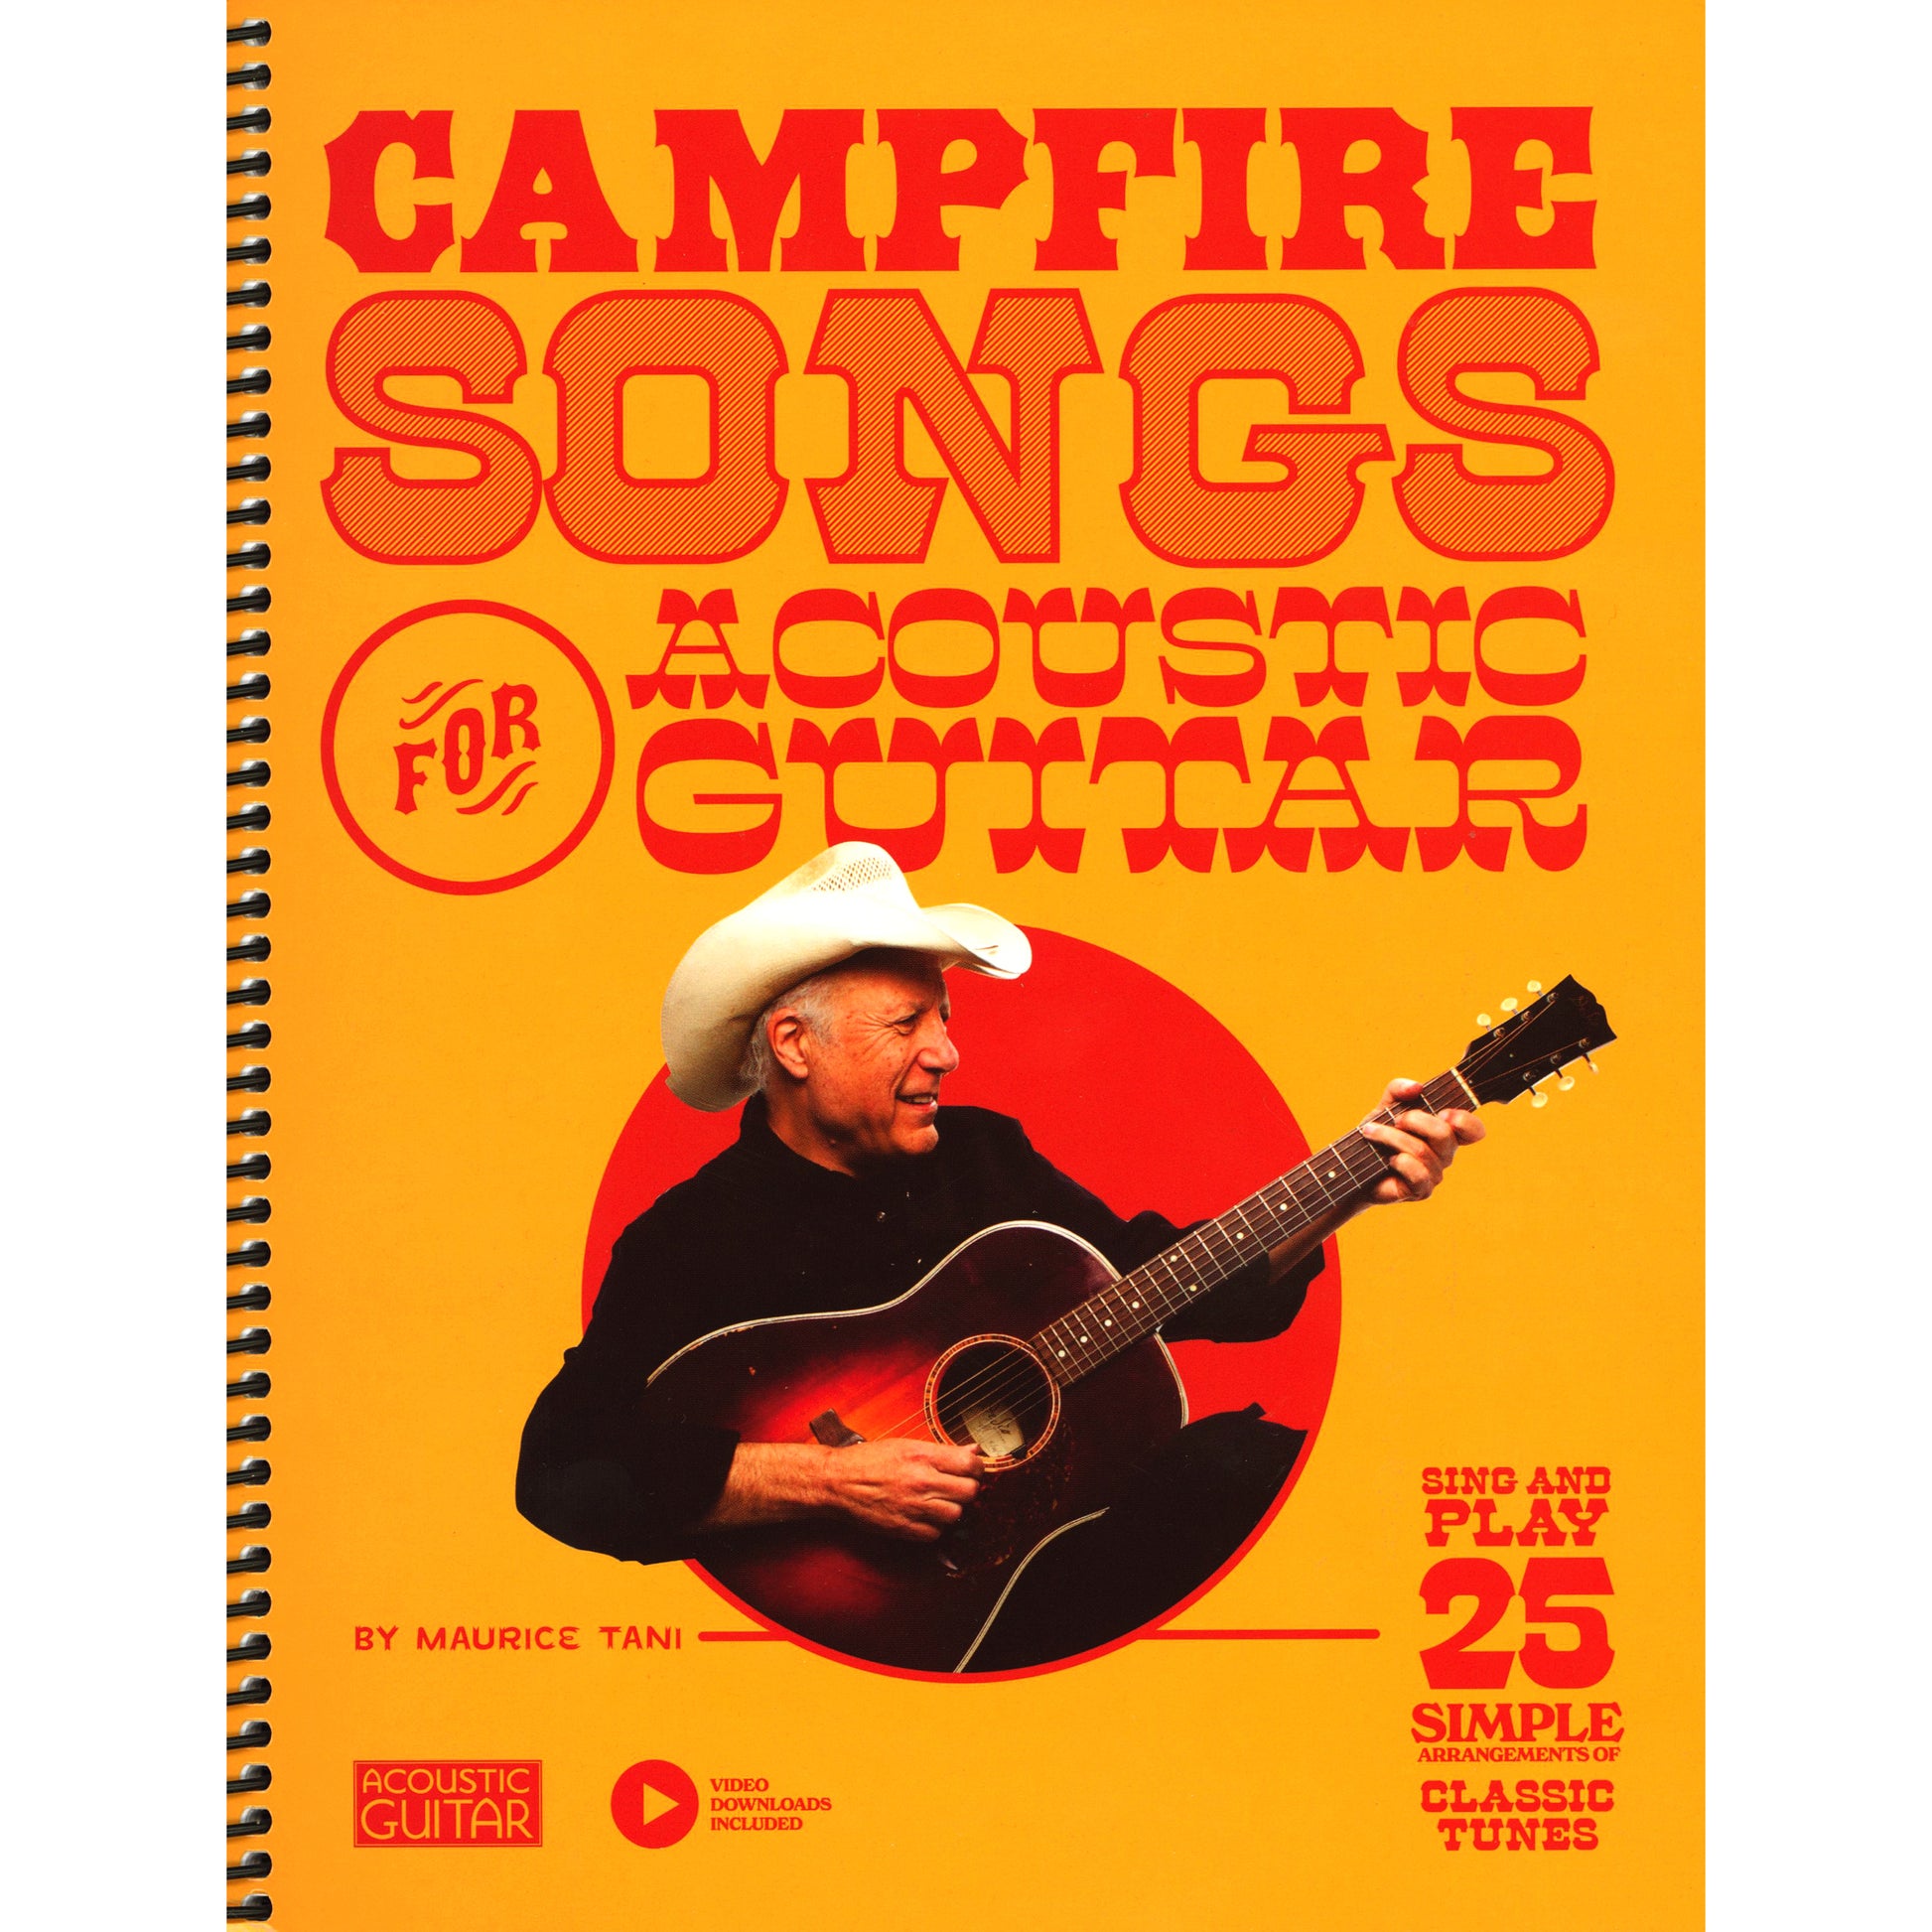 Image 1 of Campfire Songs for Acoustic Guitar - Learn to Play 25 Classic Tunes - SKU# 49-241771 : Product Type Media : Elderly Instruments